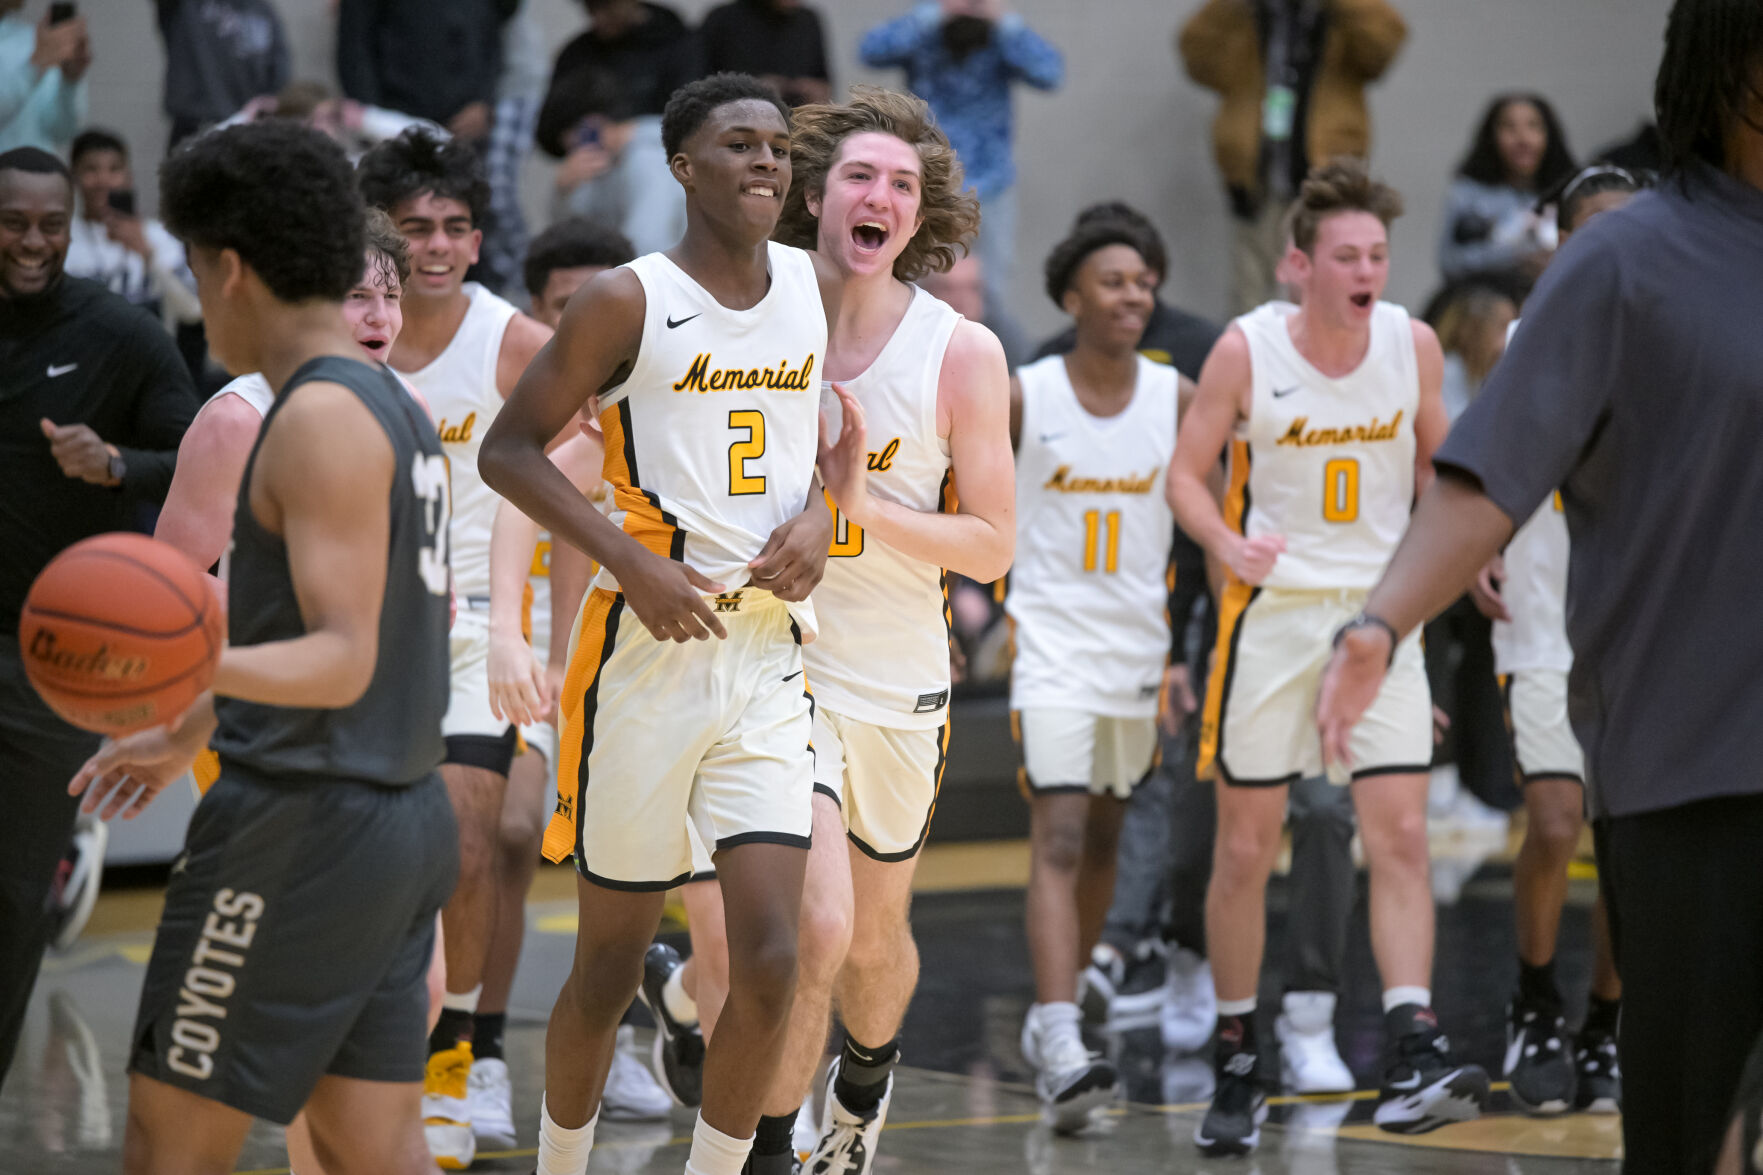 High School Basketball Recap: Memorial’s Last-Second 3-Pointer, Lomax’s Dominant Performance, and Lone Star’s Undefeated Run